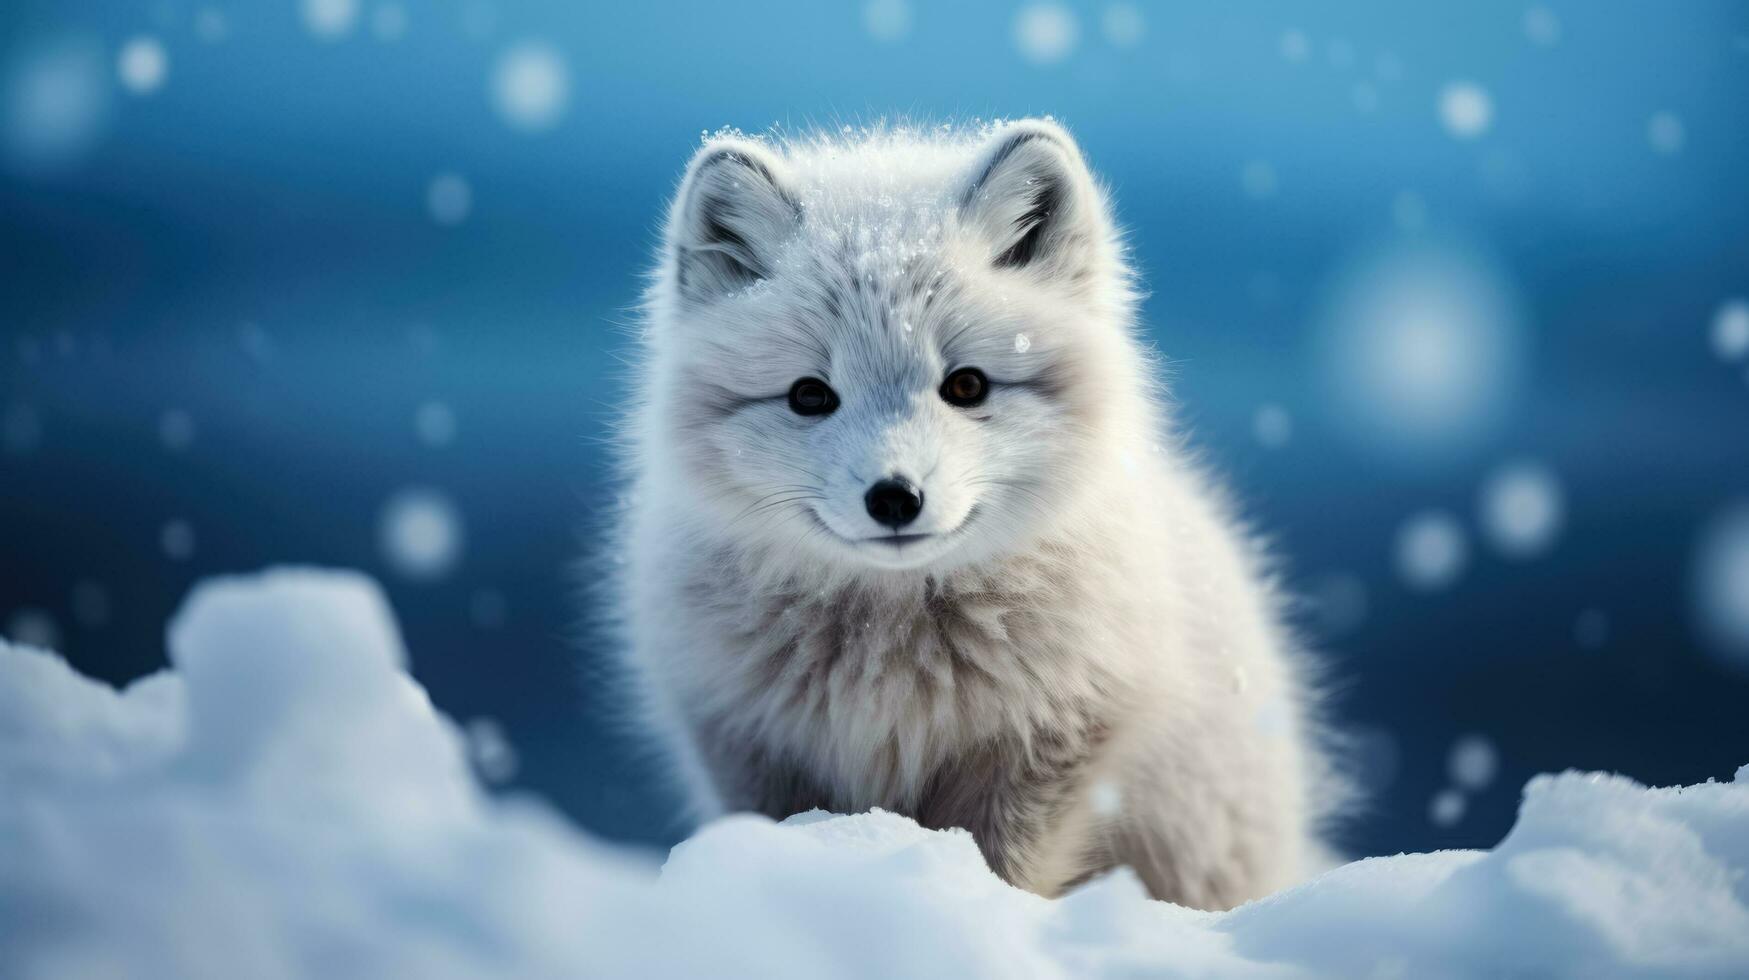 Arctic fox on snow background with empty space for text photo